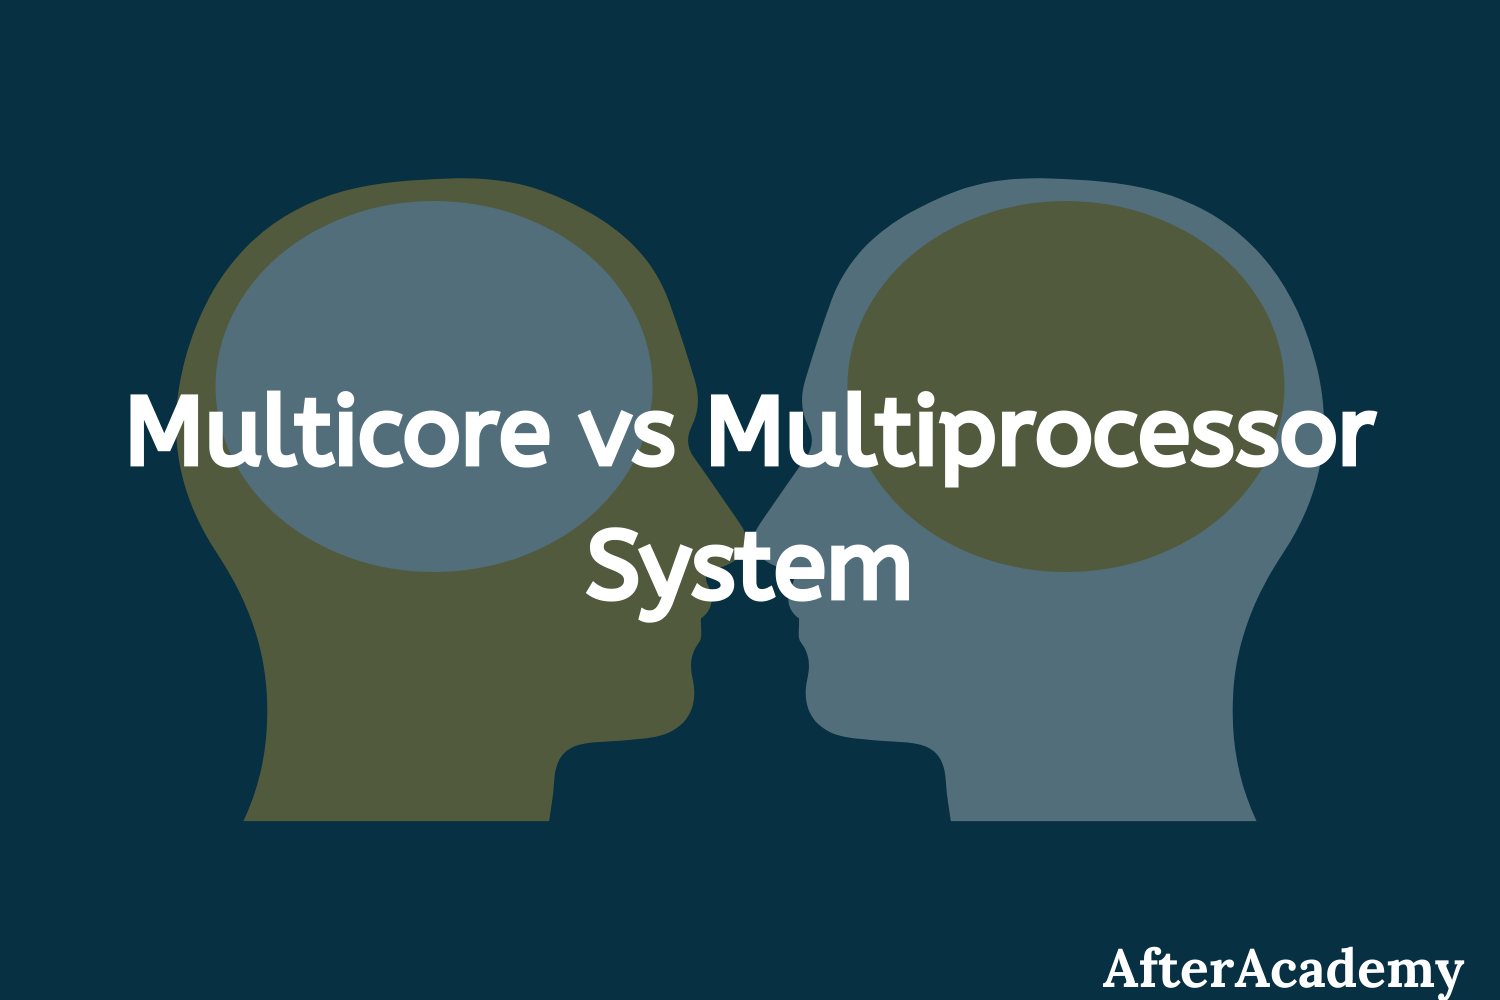 What is the difference between a Multicore System and a Multiprocessor System?